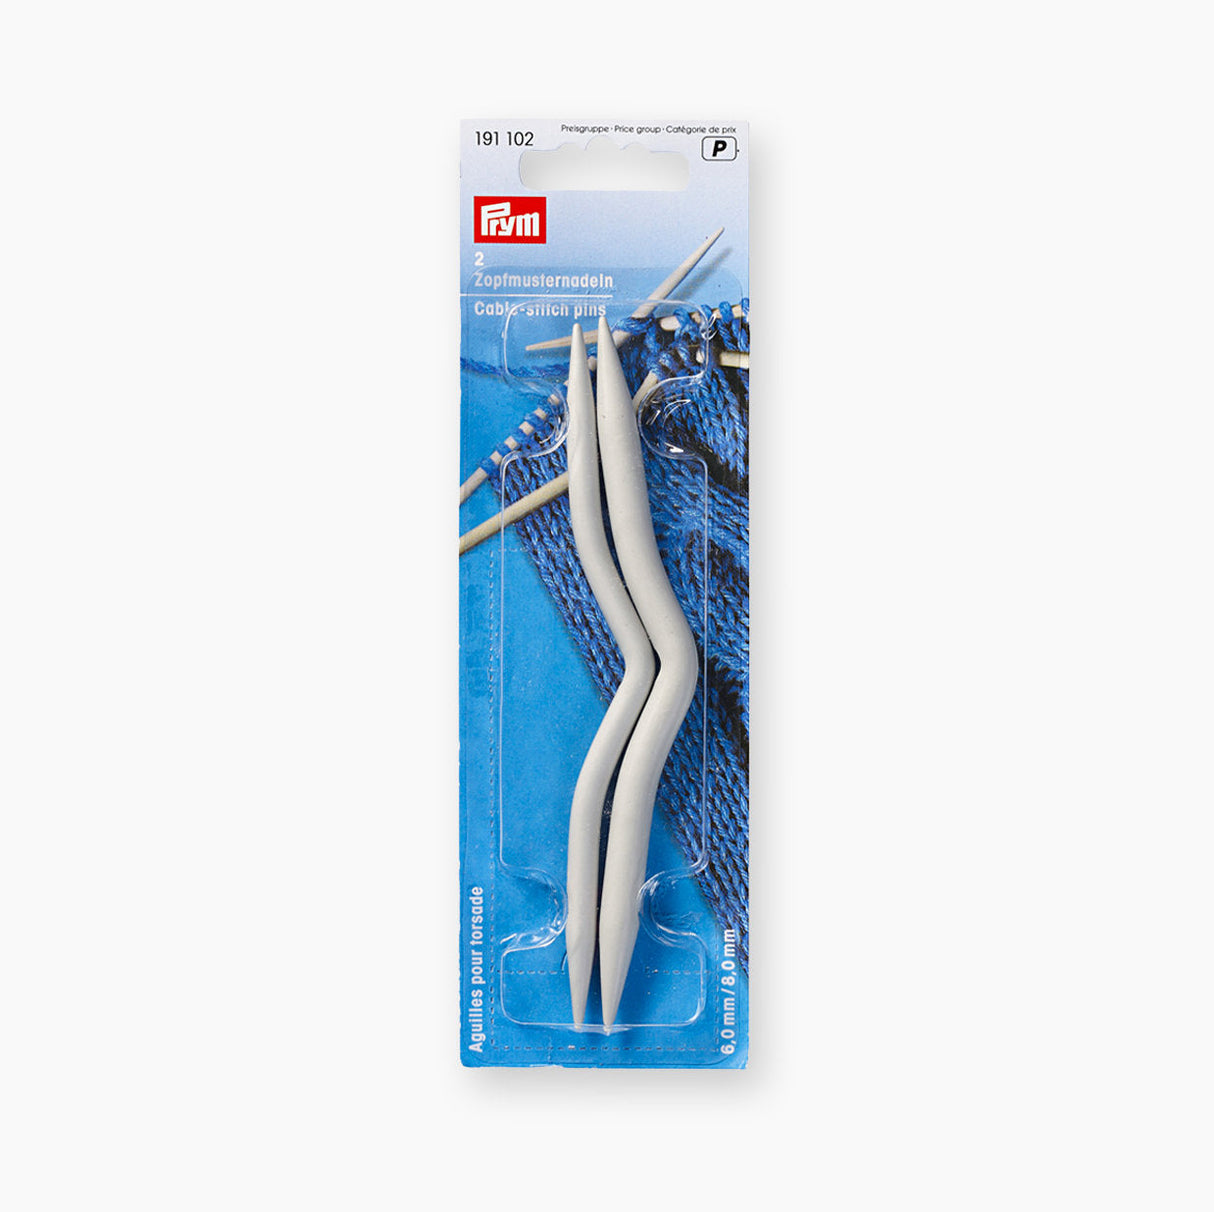 Prym Cable Knitting Needles 191102 - Your Partner for Knitting Cable Patterns